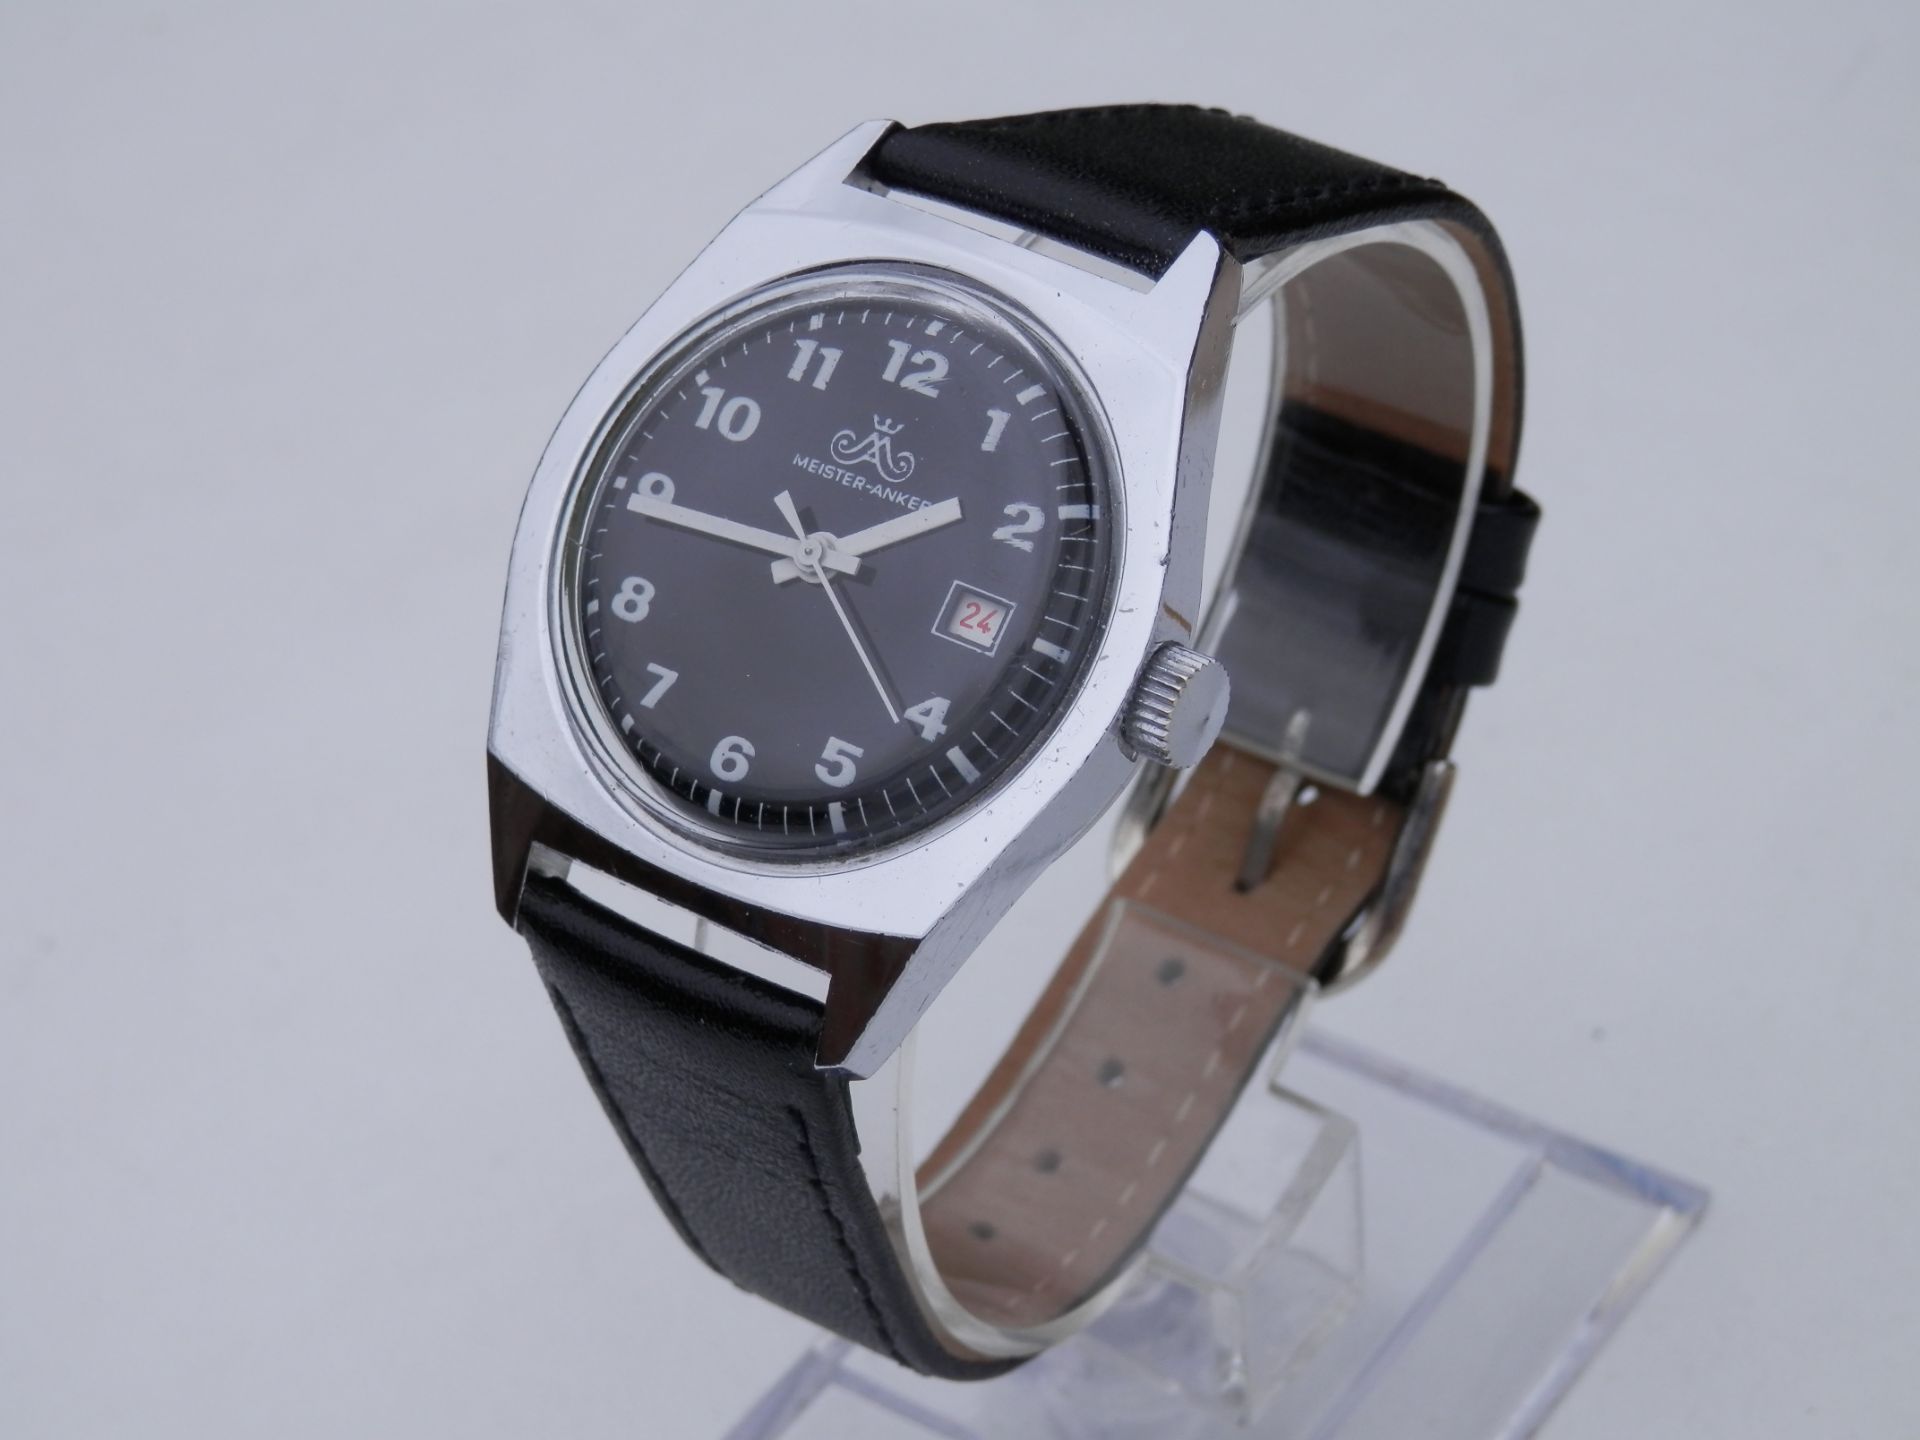 SUPERB RARE GENTS 1960S GERMAN MADE MEISTER ANKER HAND WIND DATE WATCH. - Image 2 of 10